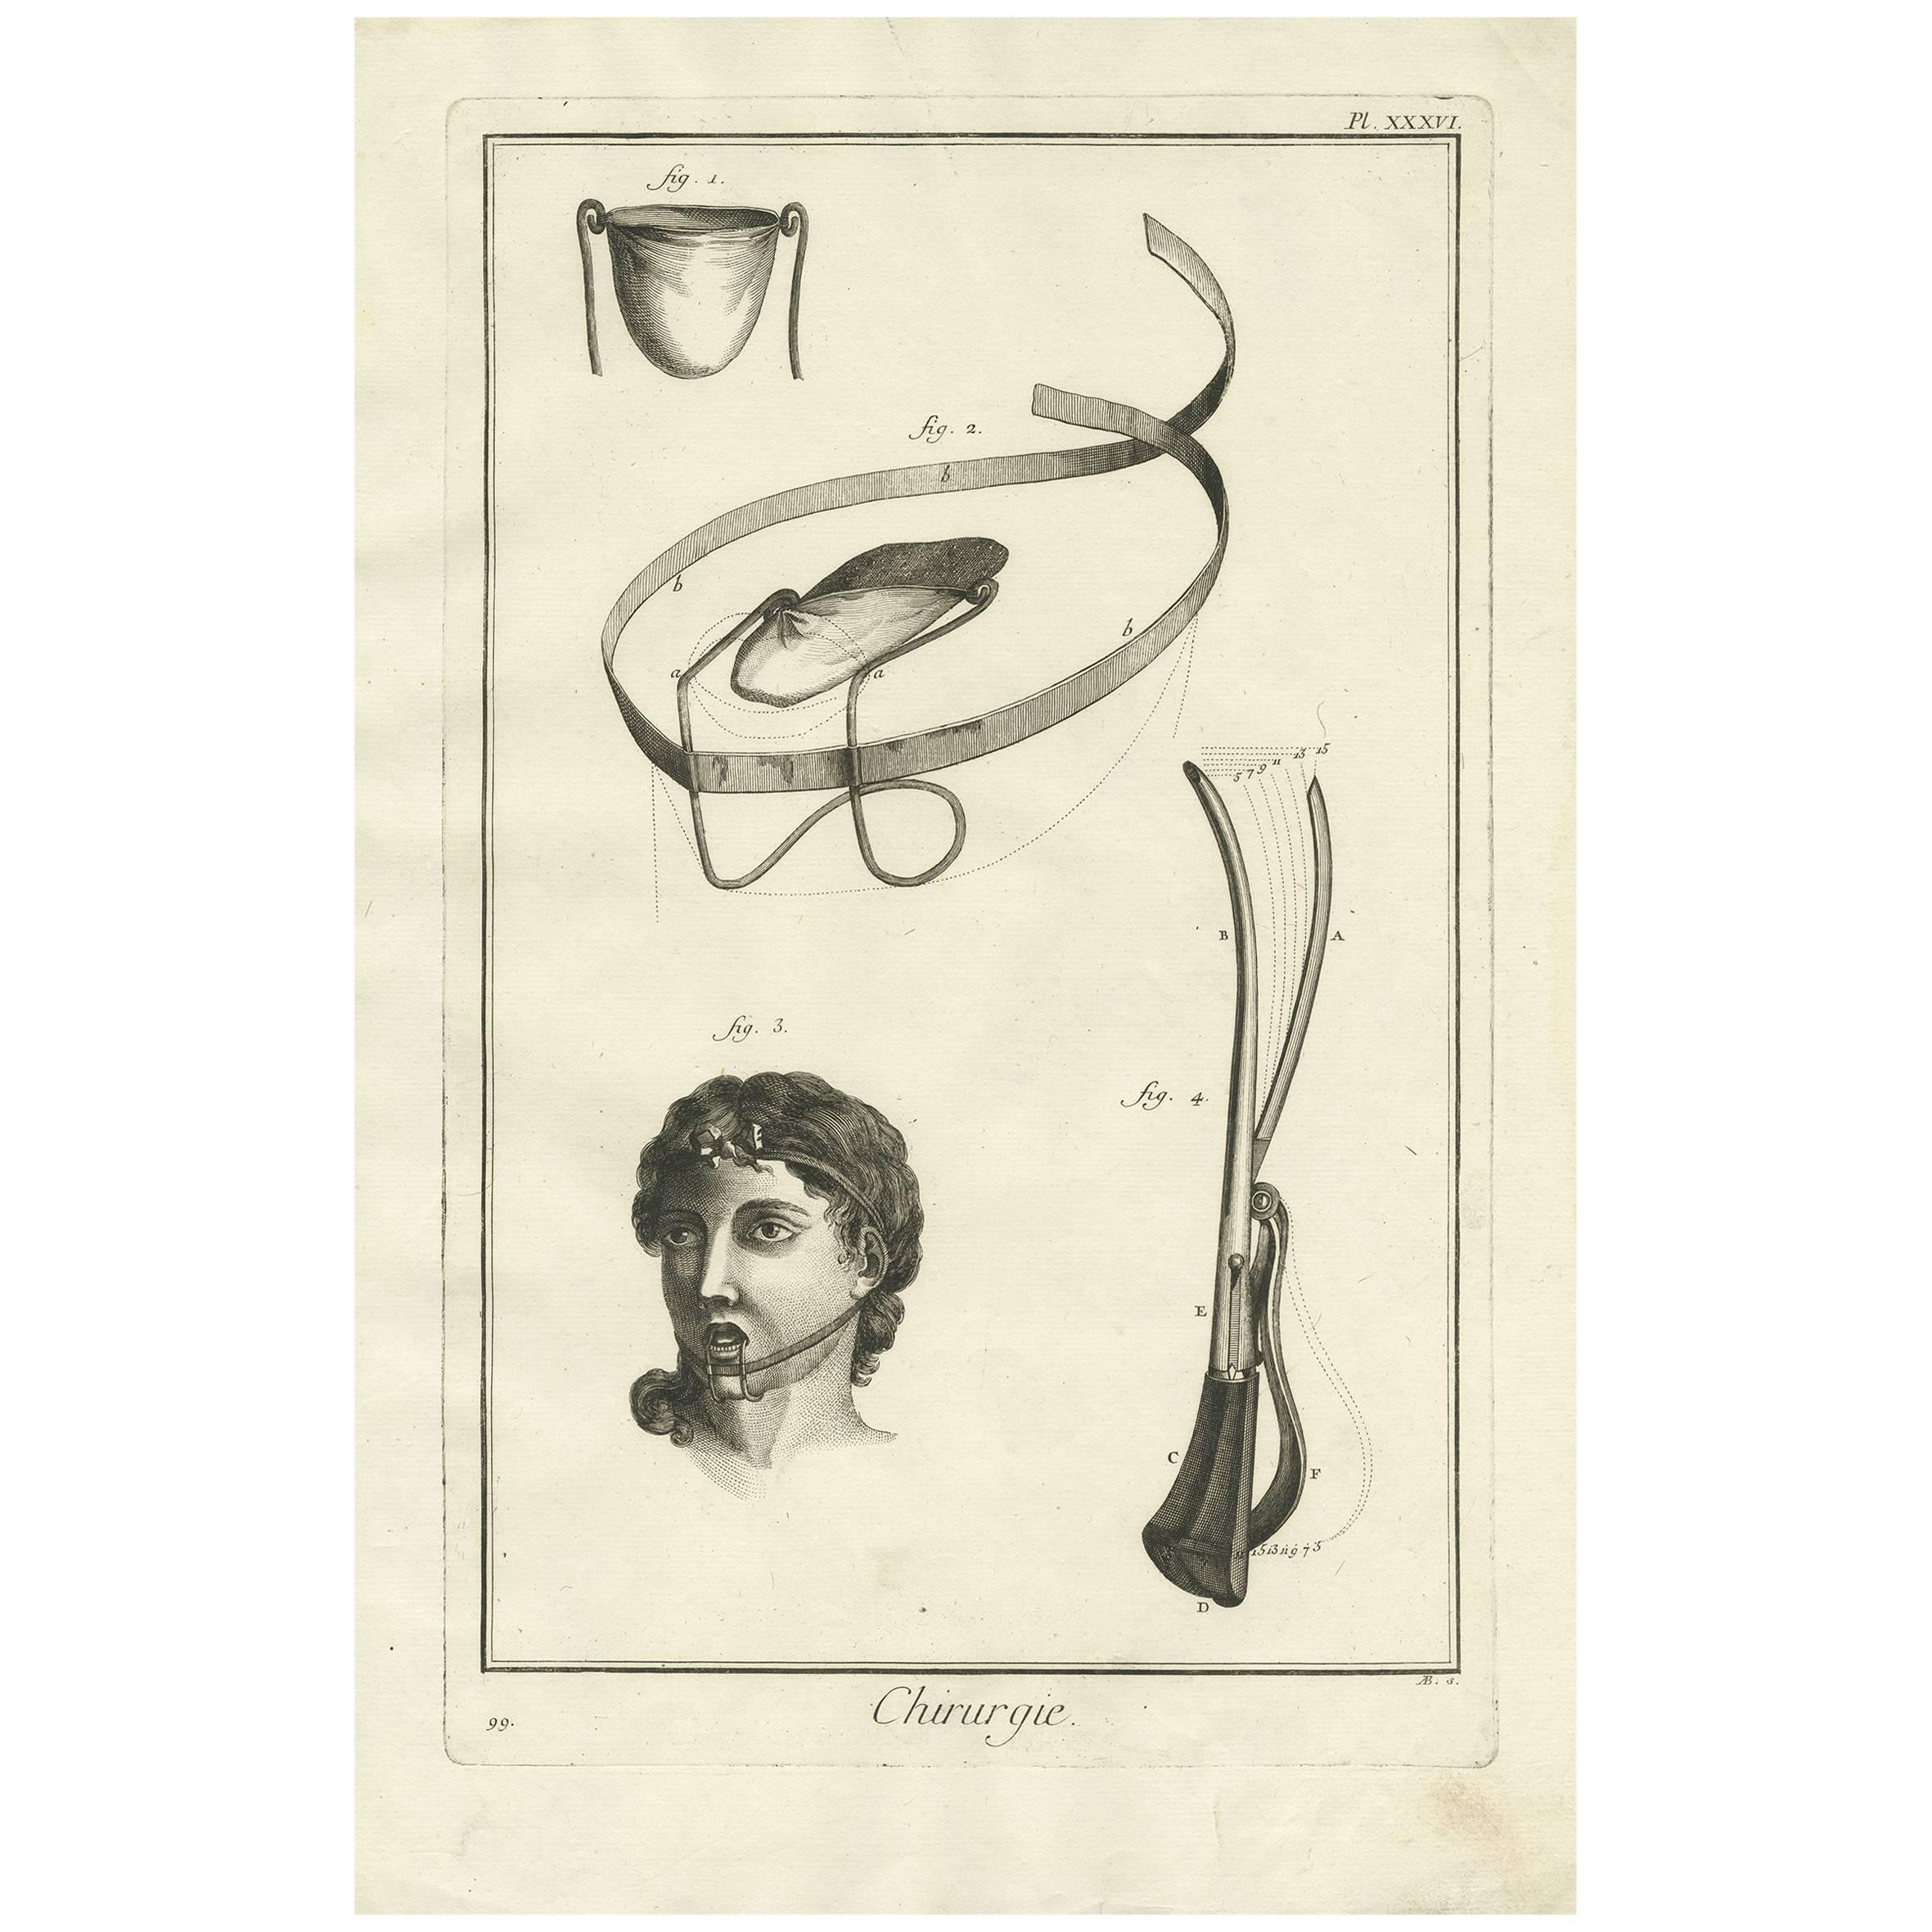 Antique Medical Print 'Pl. XXXVI' by D. Diderot, circa 1760 For Sale